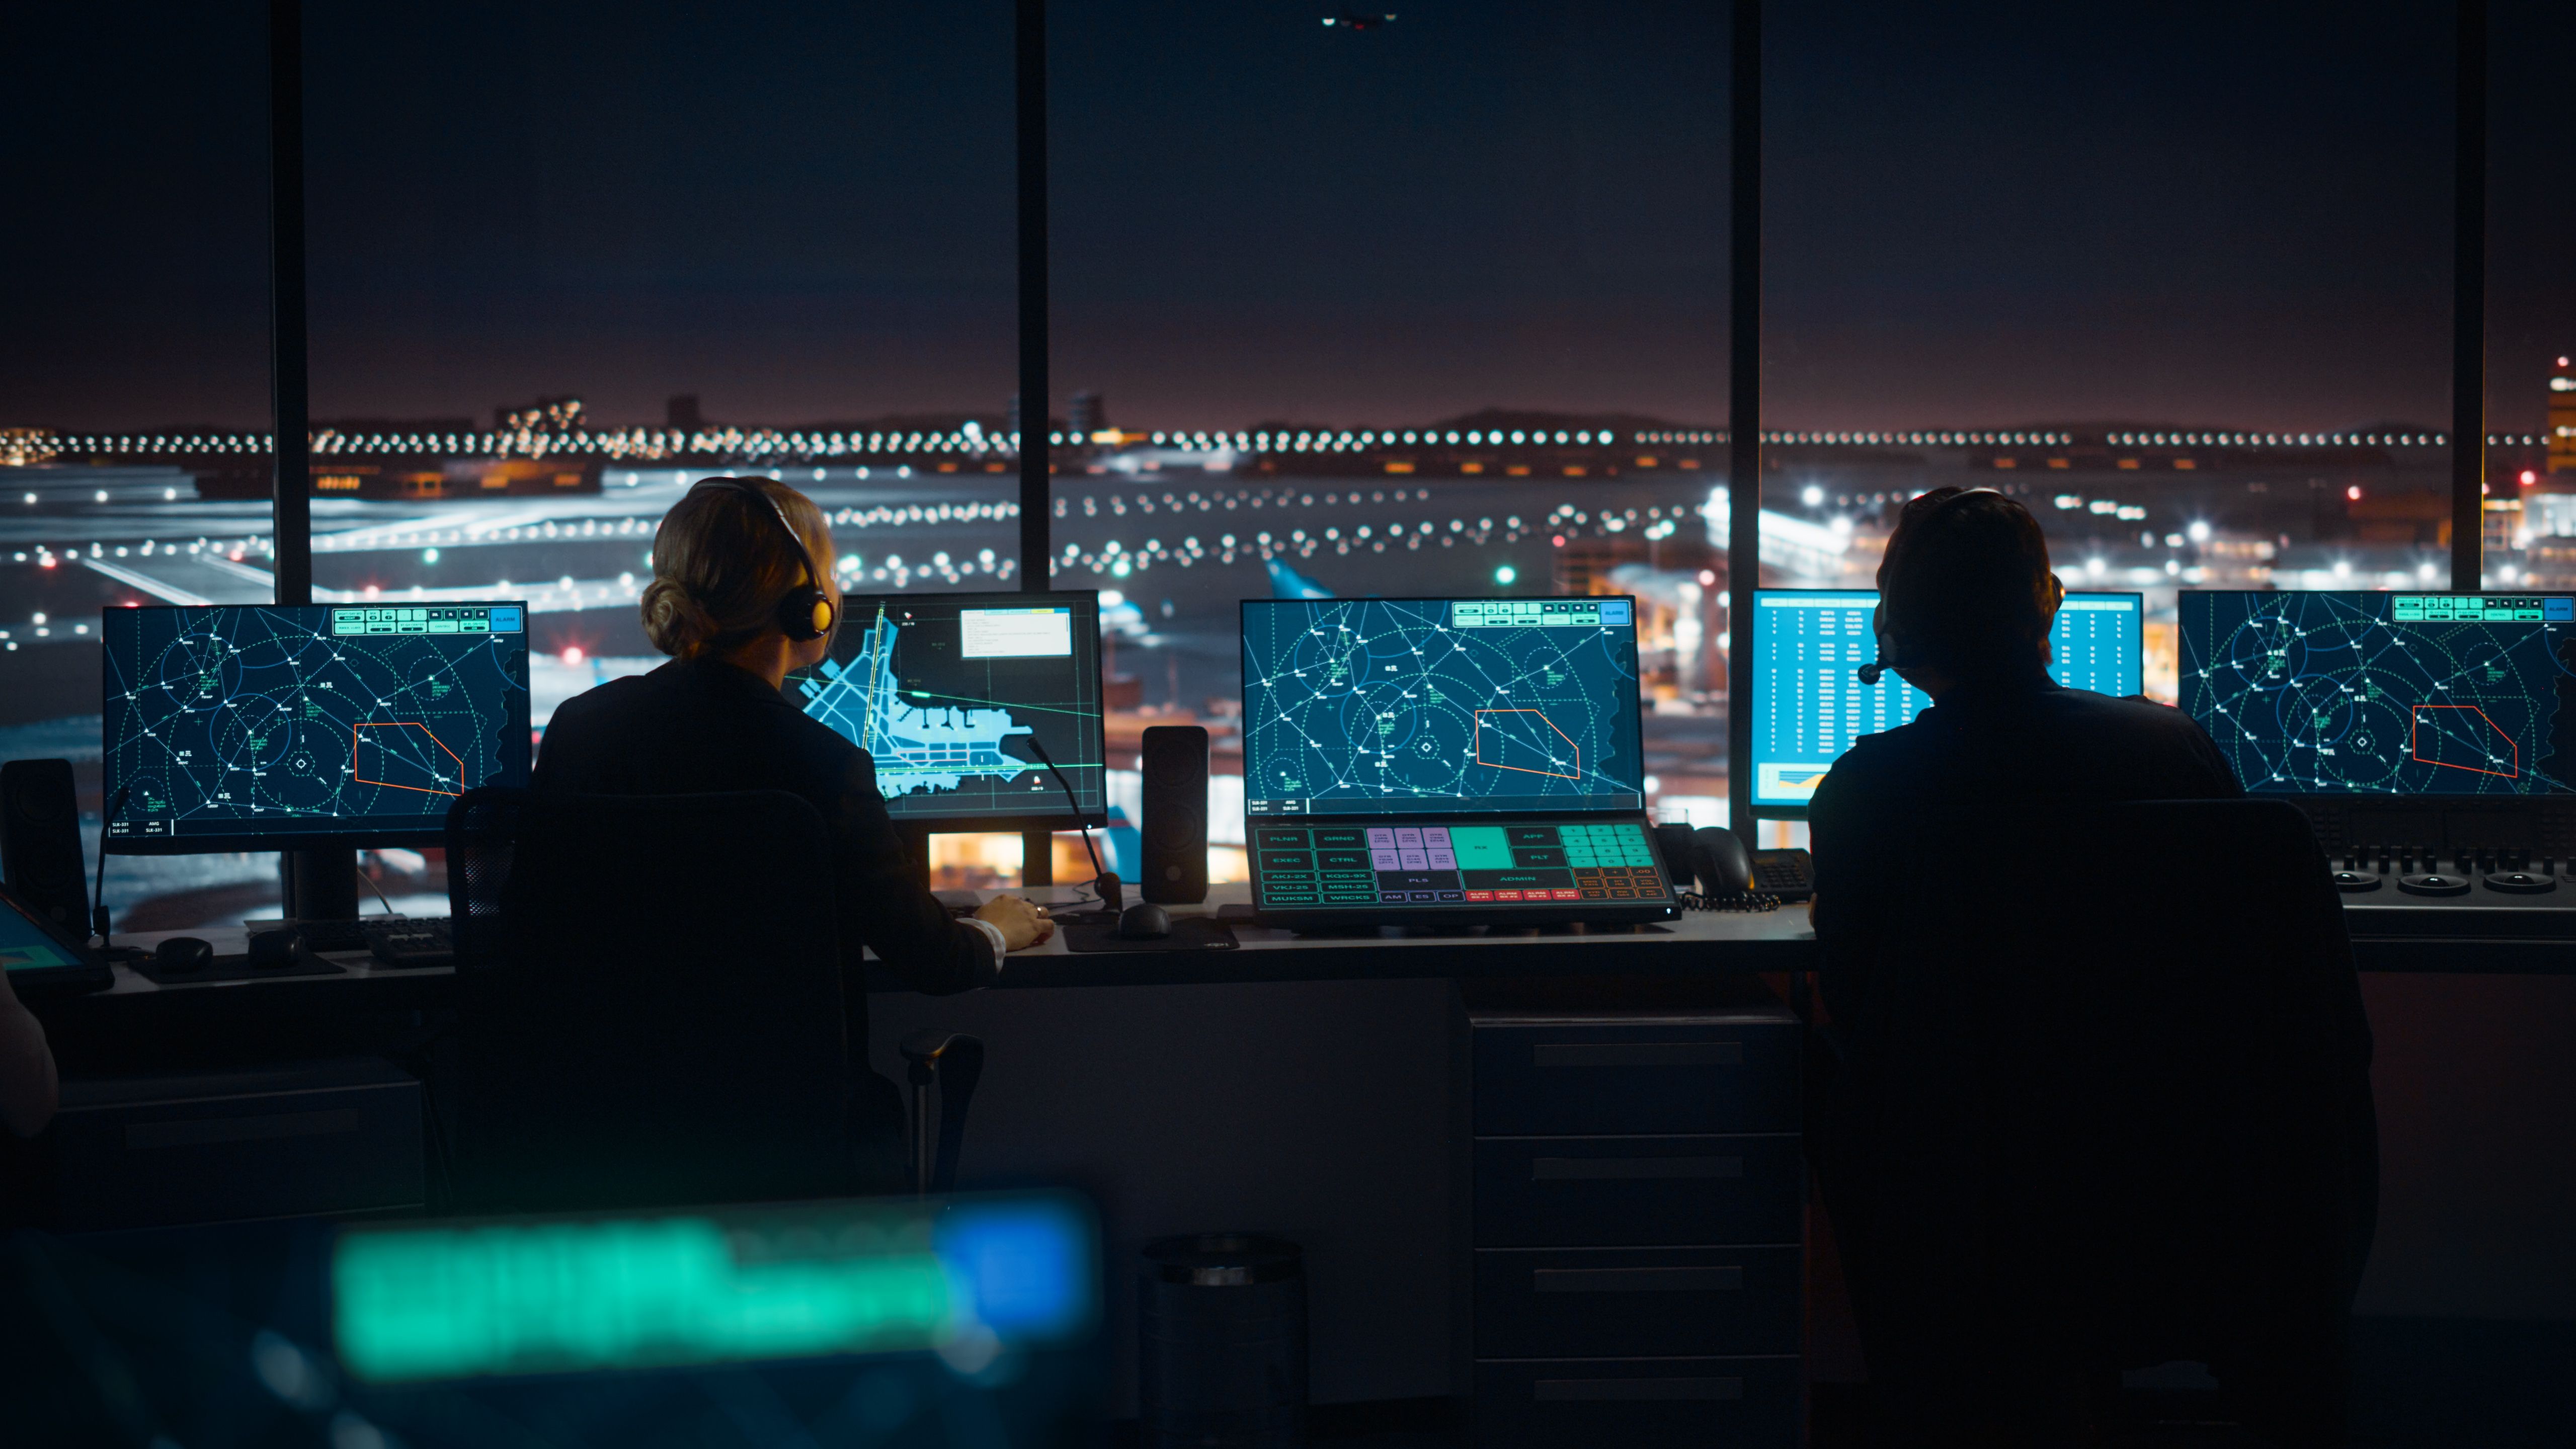 Two workers sitting behind Air Traffic Control Displays in a tower overlooking the airport apron.